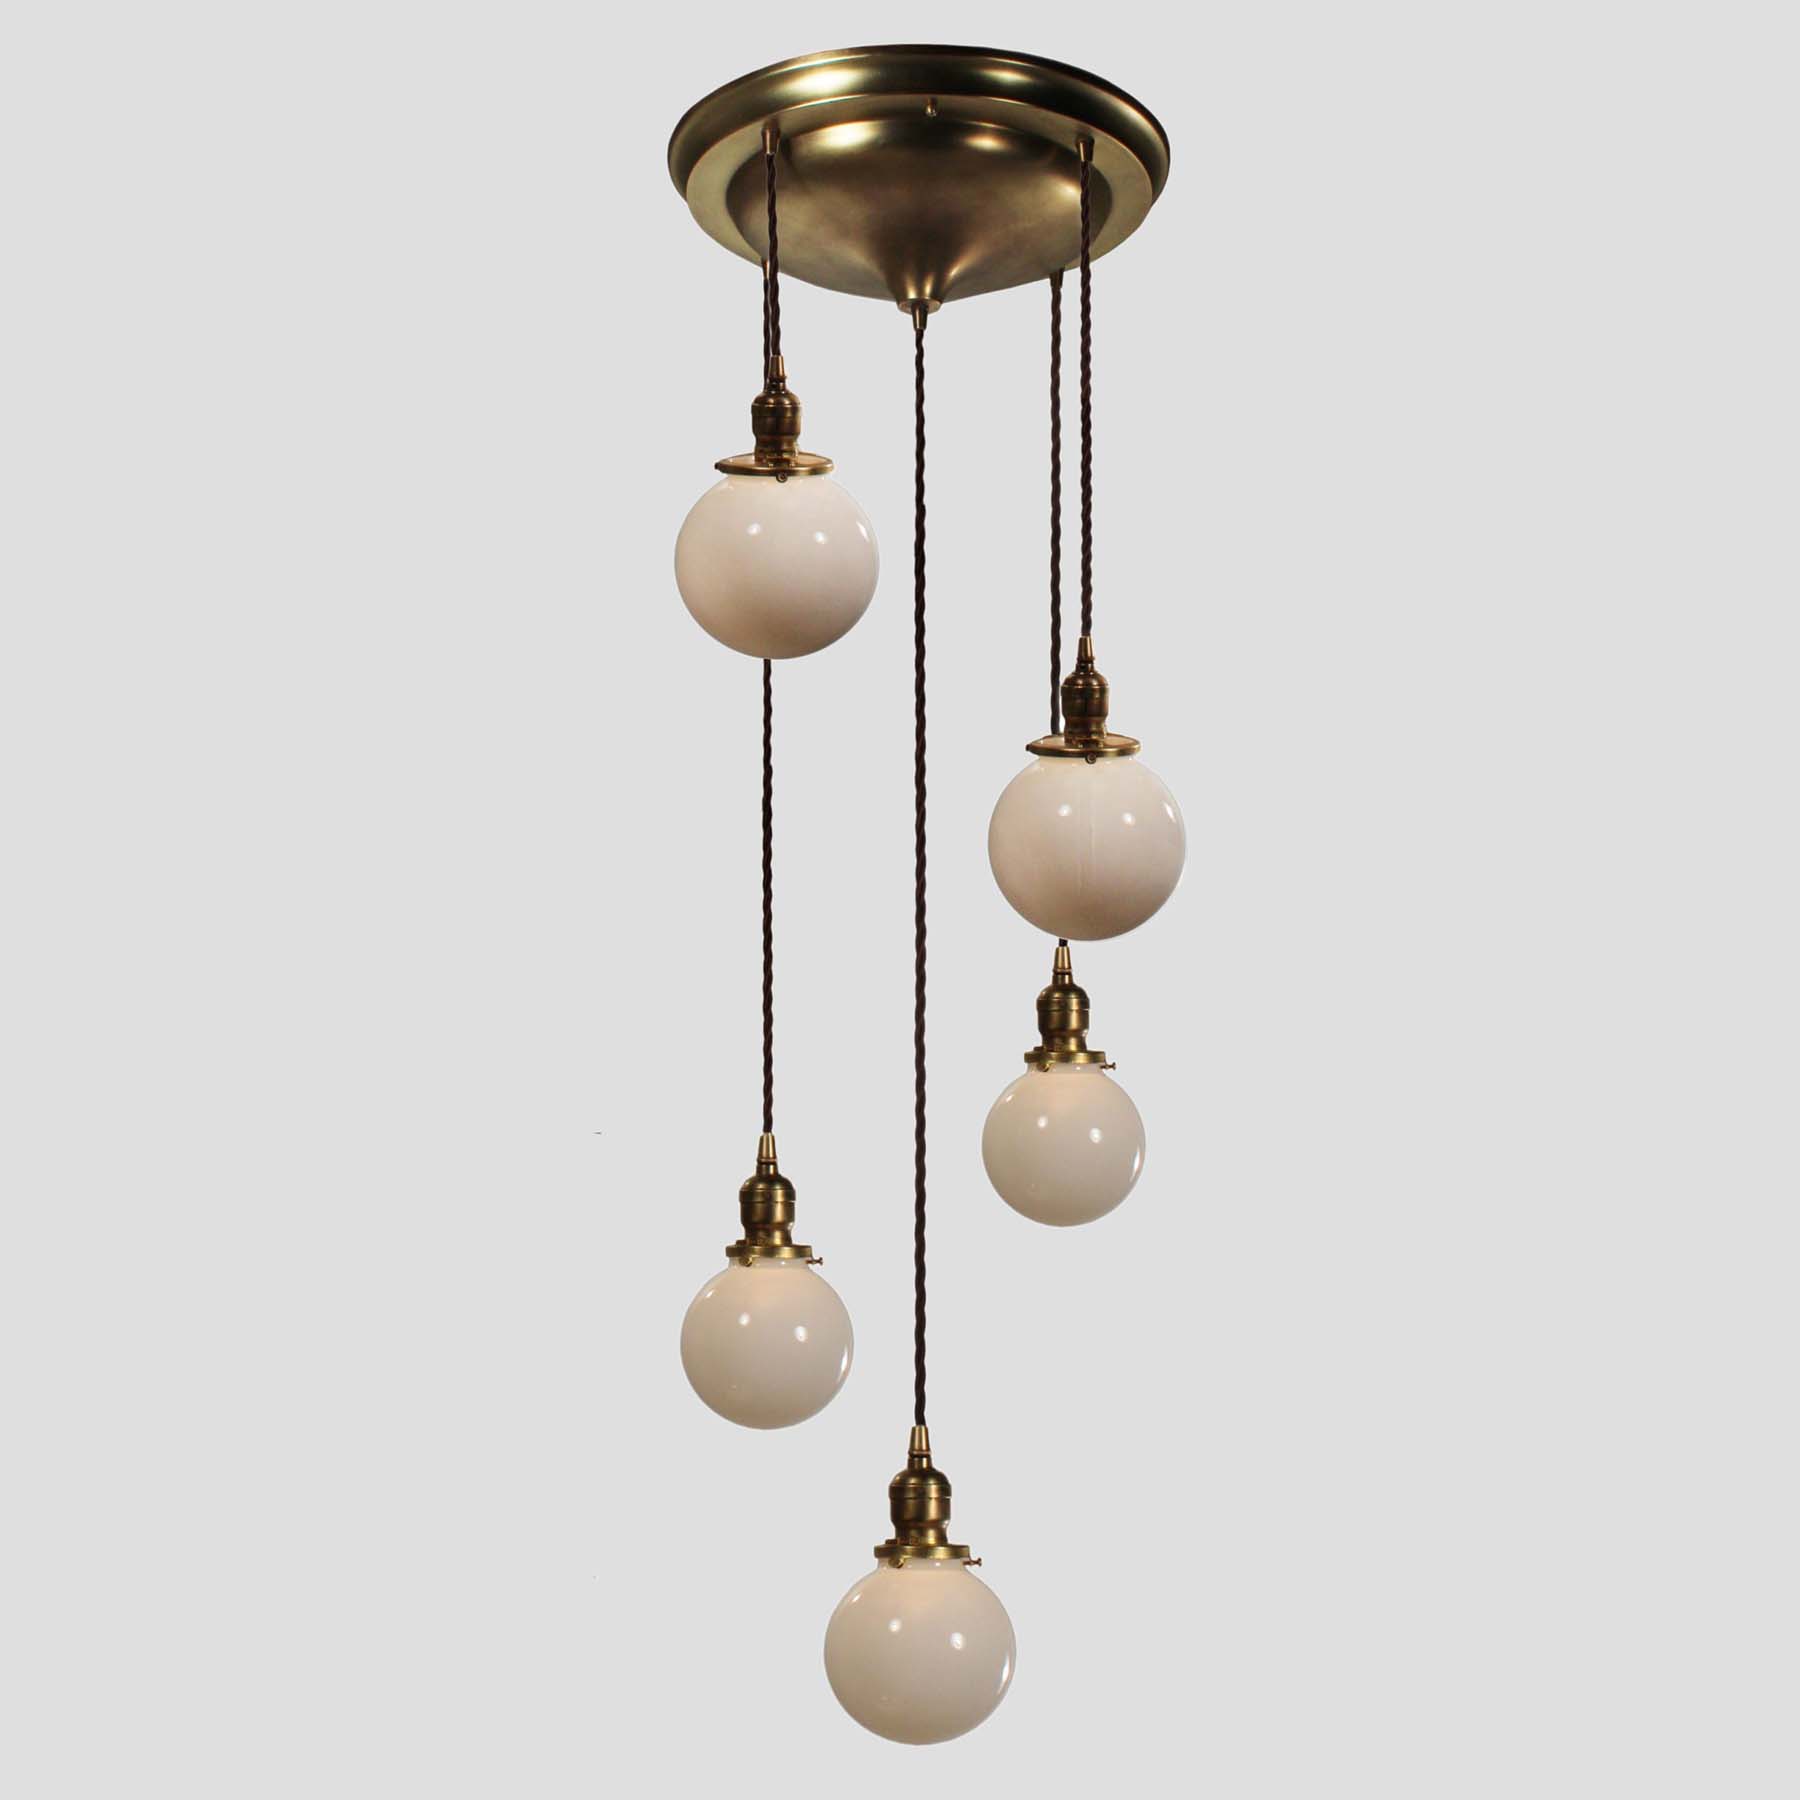 SOLD Antique Semi Flush-Mount Chandelier with Ball Shades-67104